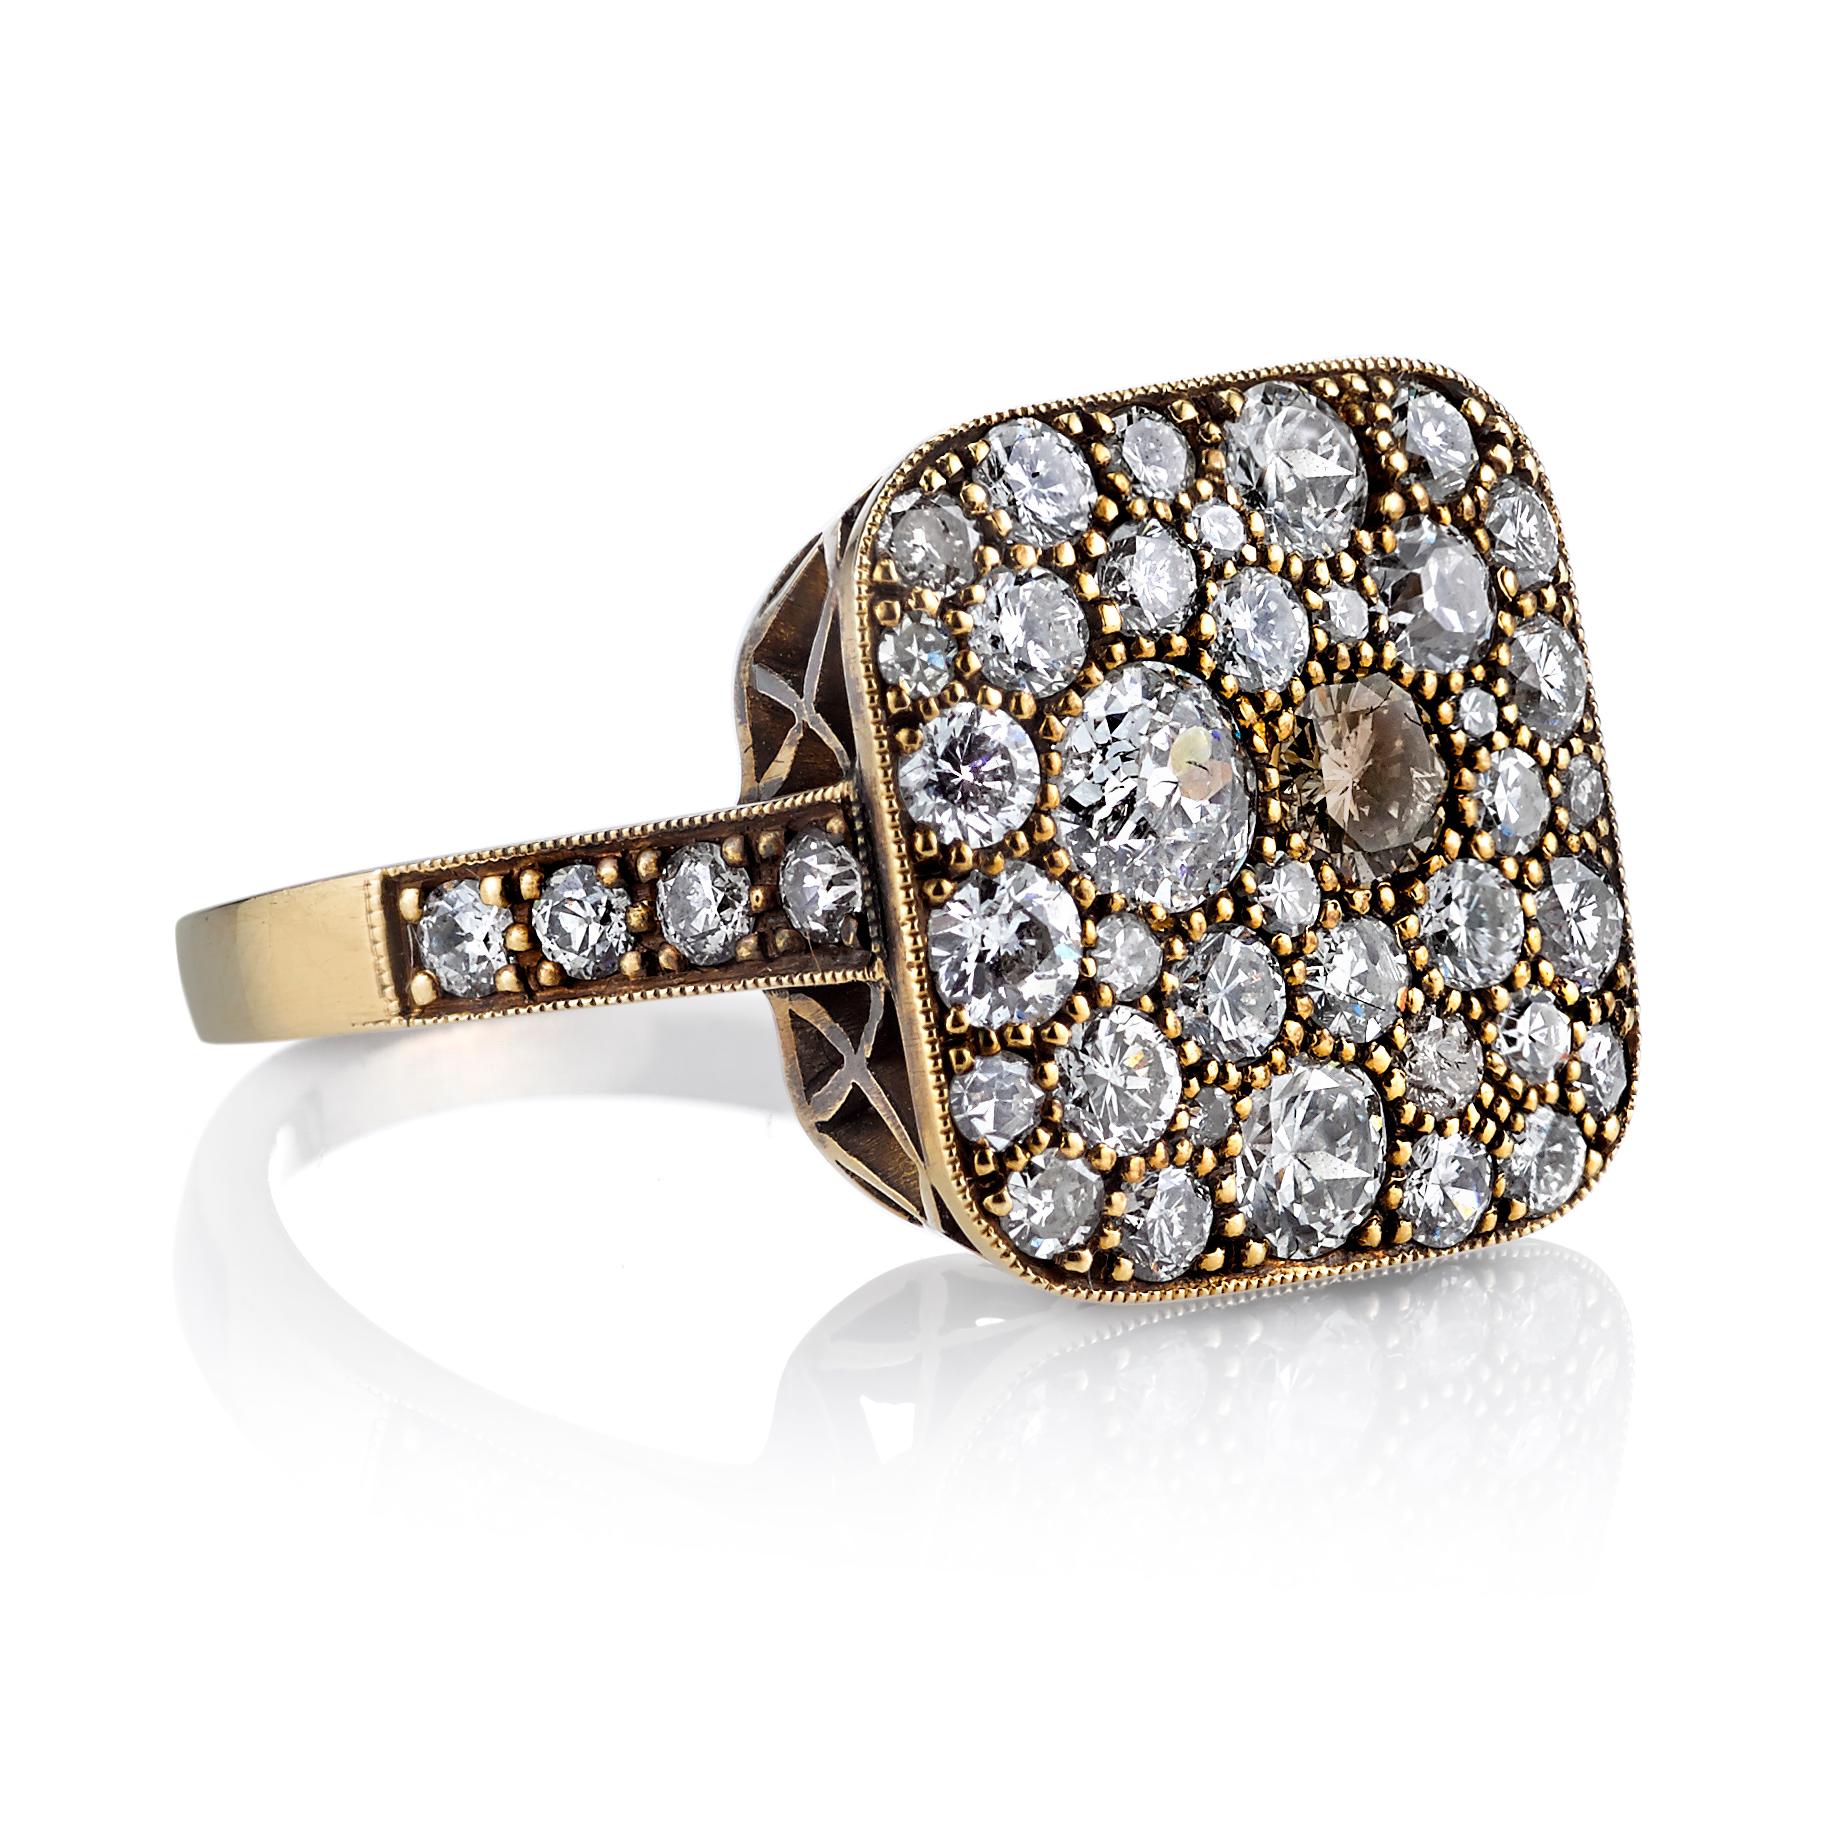 Approximately 2.30ctw varying old cut and round brilliant cut diamonds in a handcrafted 18K oxidized yellow gold mounting. 

Ring is currently size 6. Please contact us about potential re-sizing.

Prices may vary according to total diamond weight